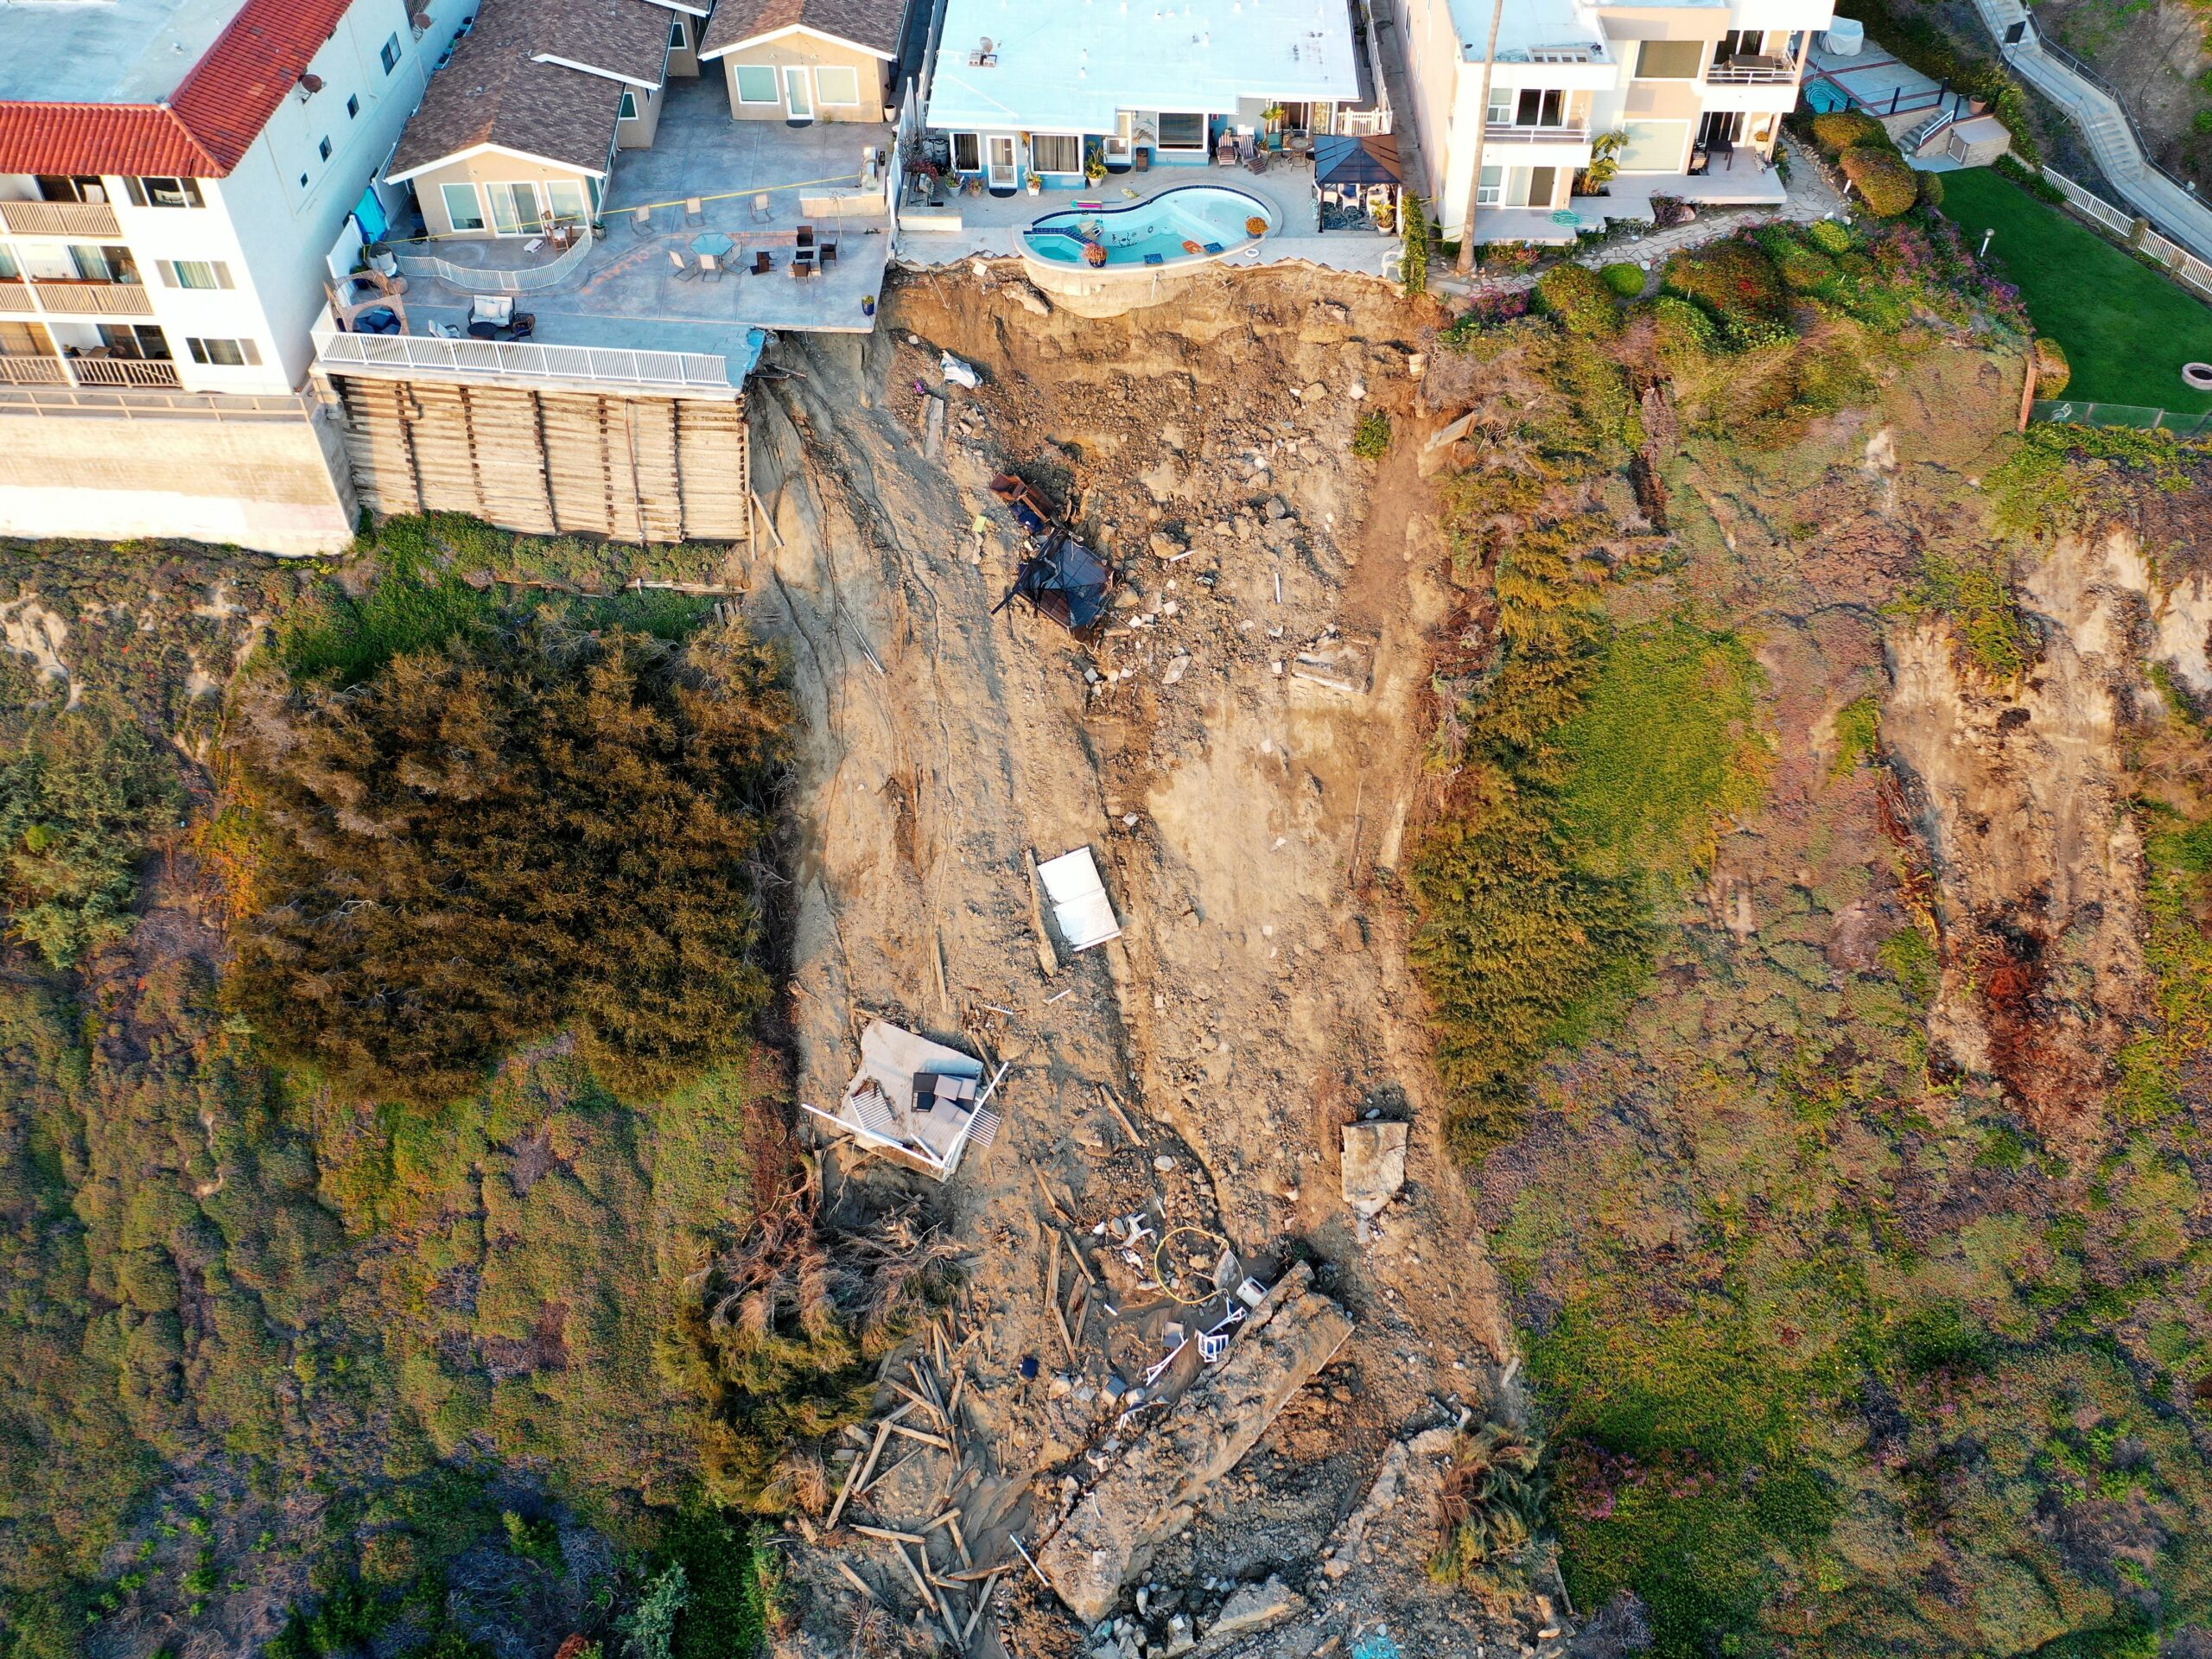 Heavy rain and landslides in California left part of a backyard